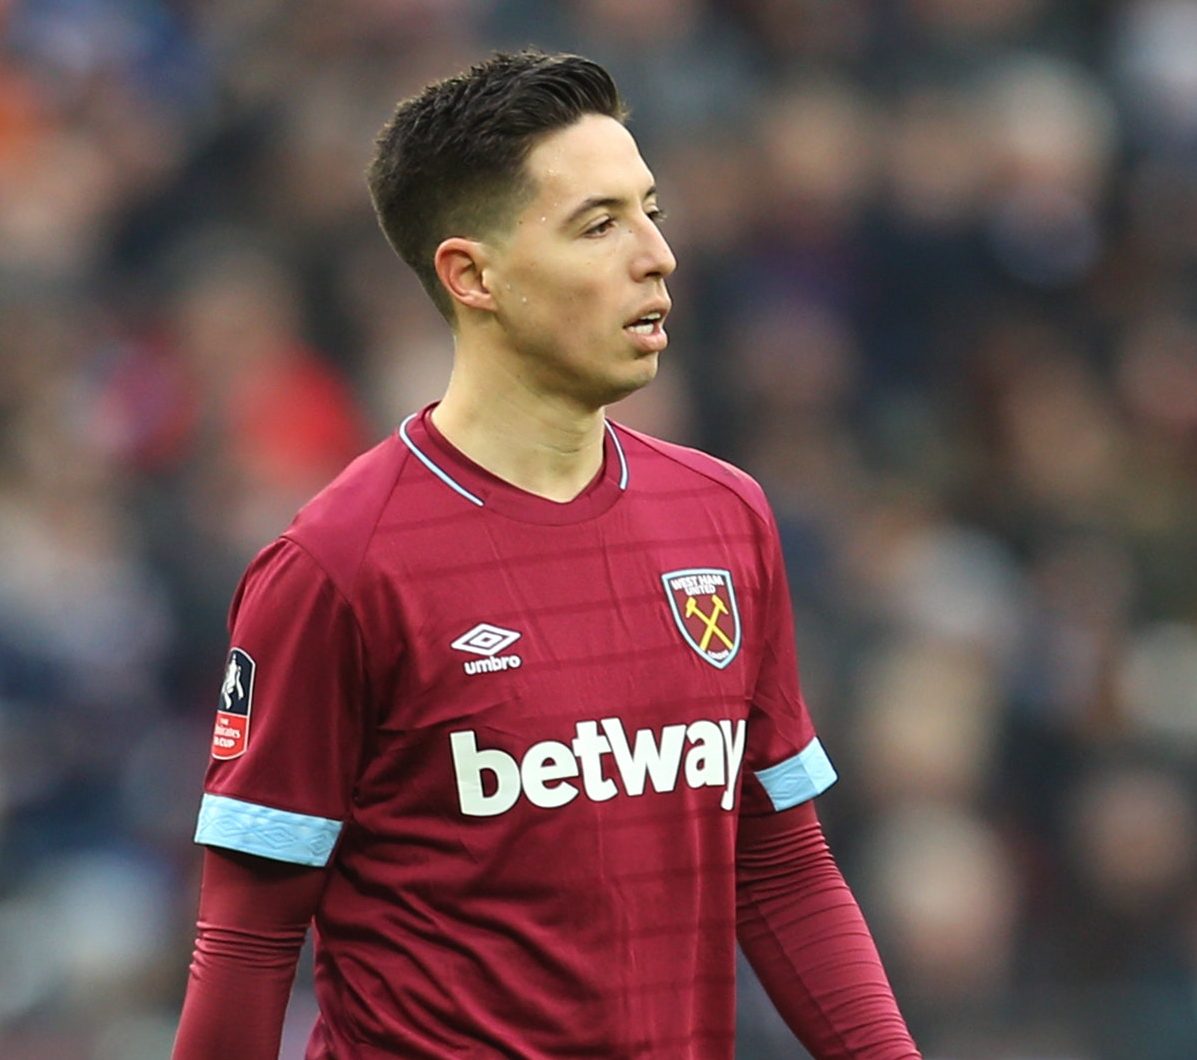 Much More To Come From Nasri – Pellegrini